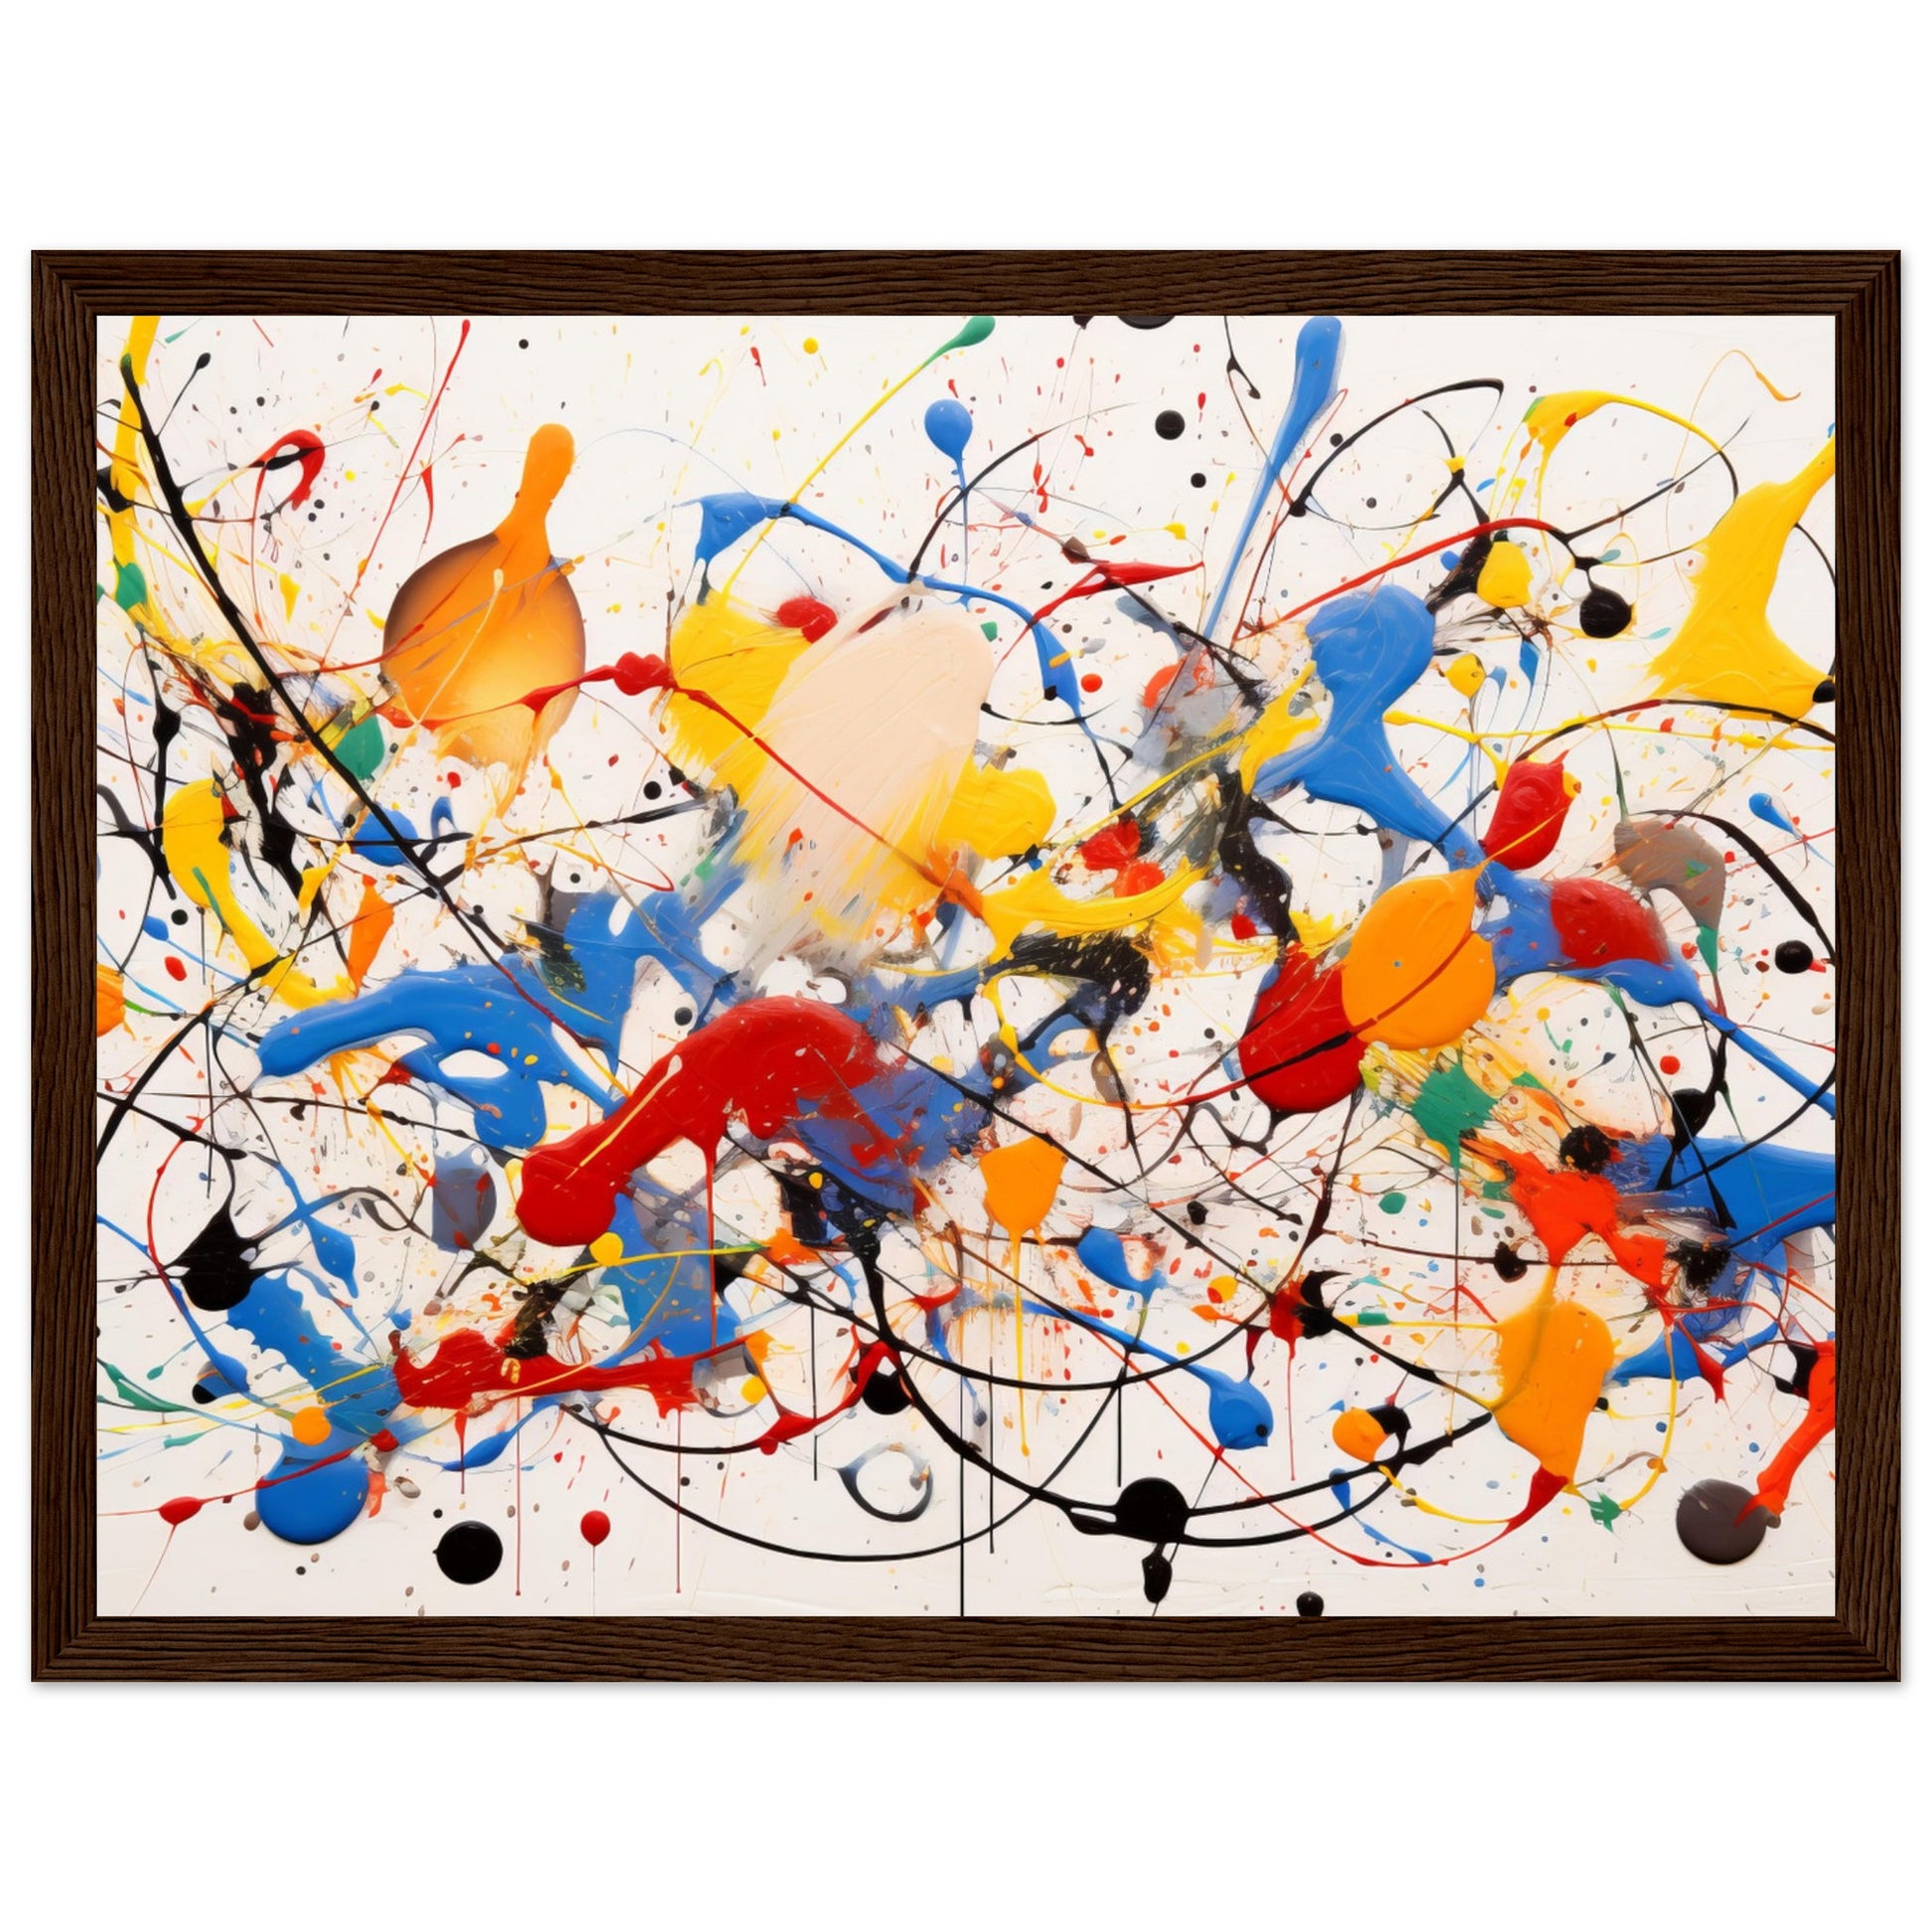 Dynamic Abstract Art Print #17 - Inspired by Pollock - 70x100 cm / 28x40"